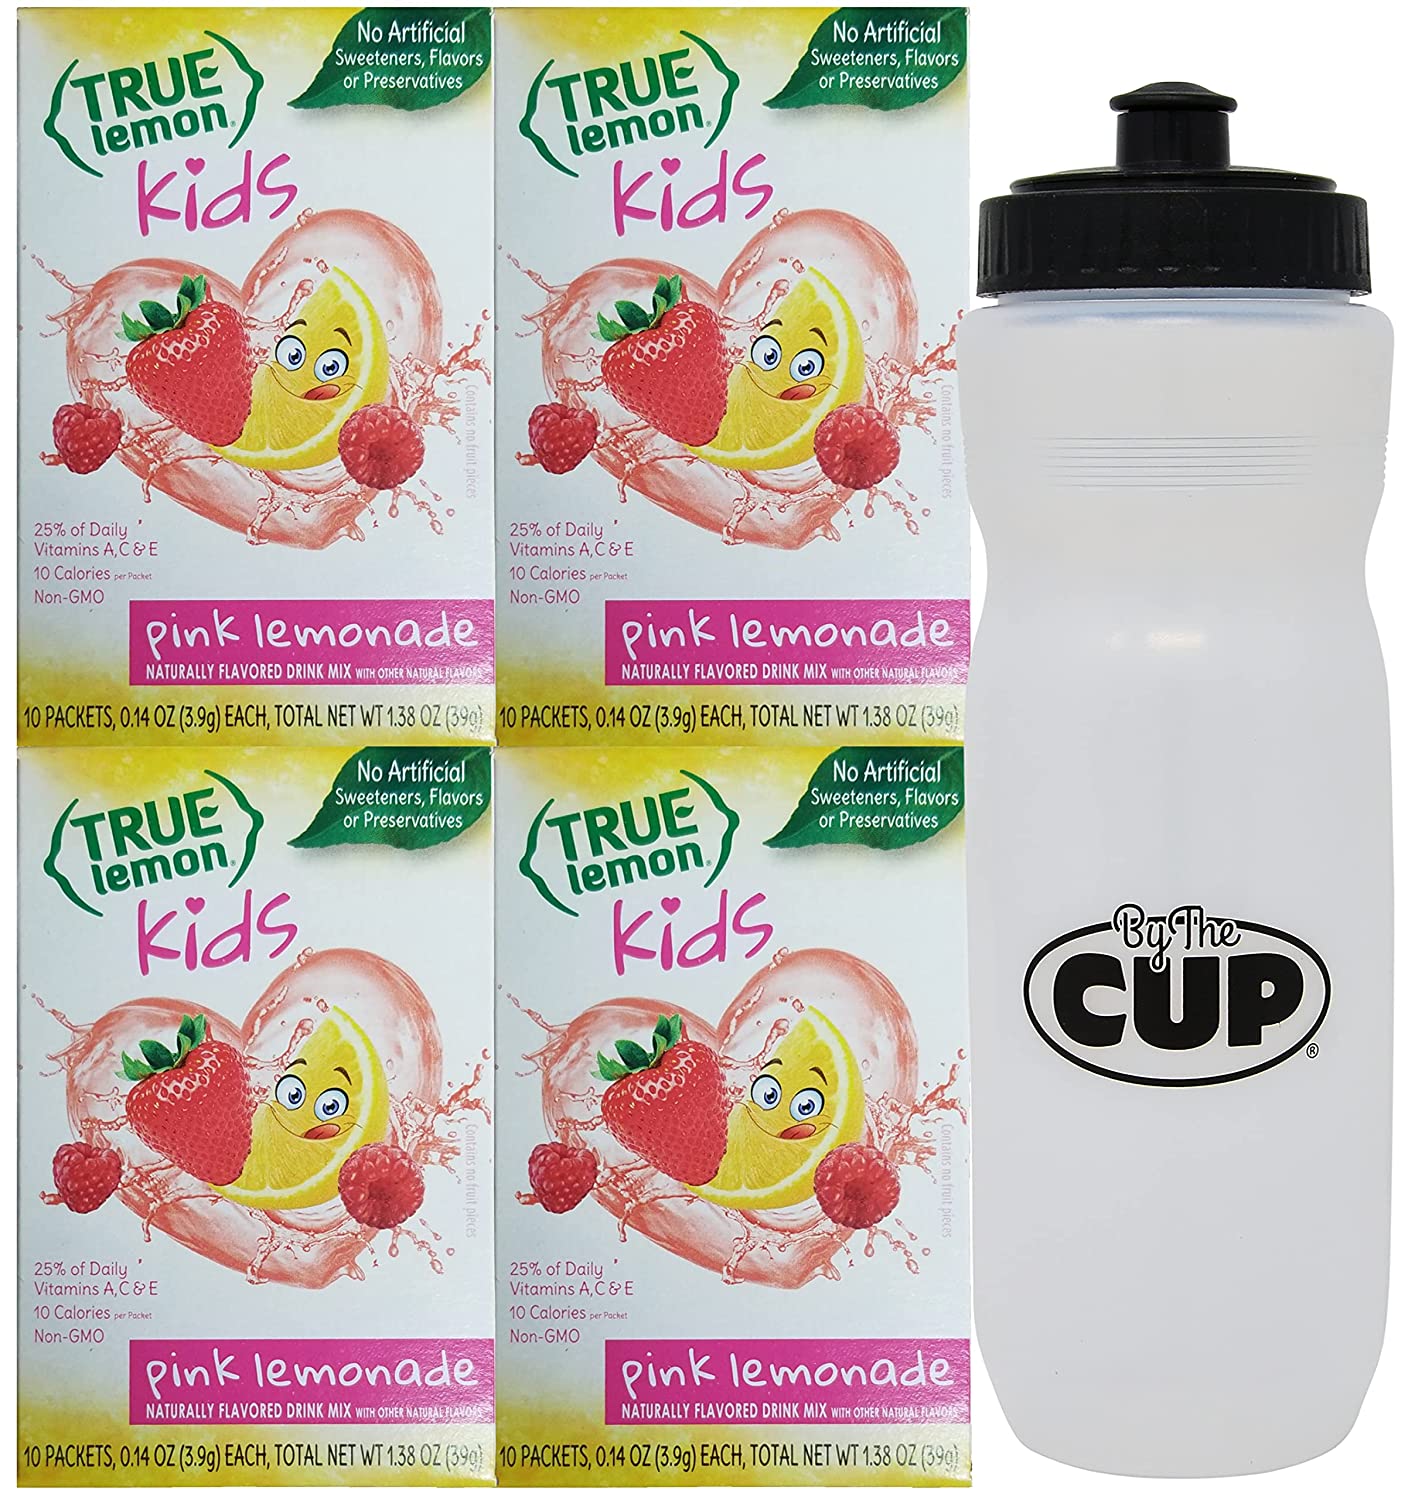 True Lemon Kids Pink Lemonade 10 Count (Pack of 4) with By The Cup Sports Bottle